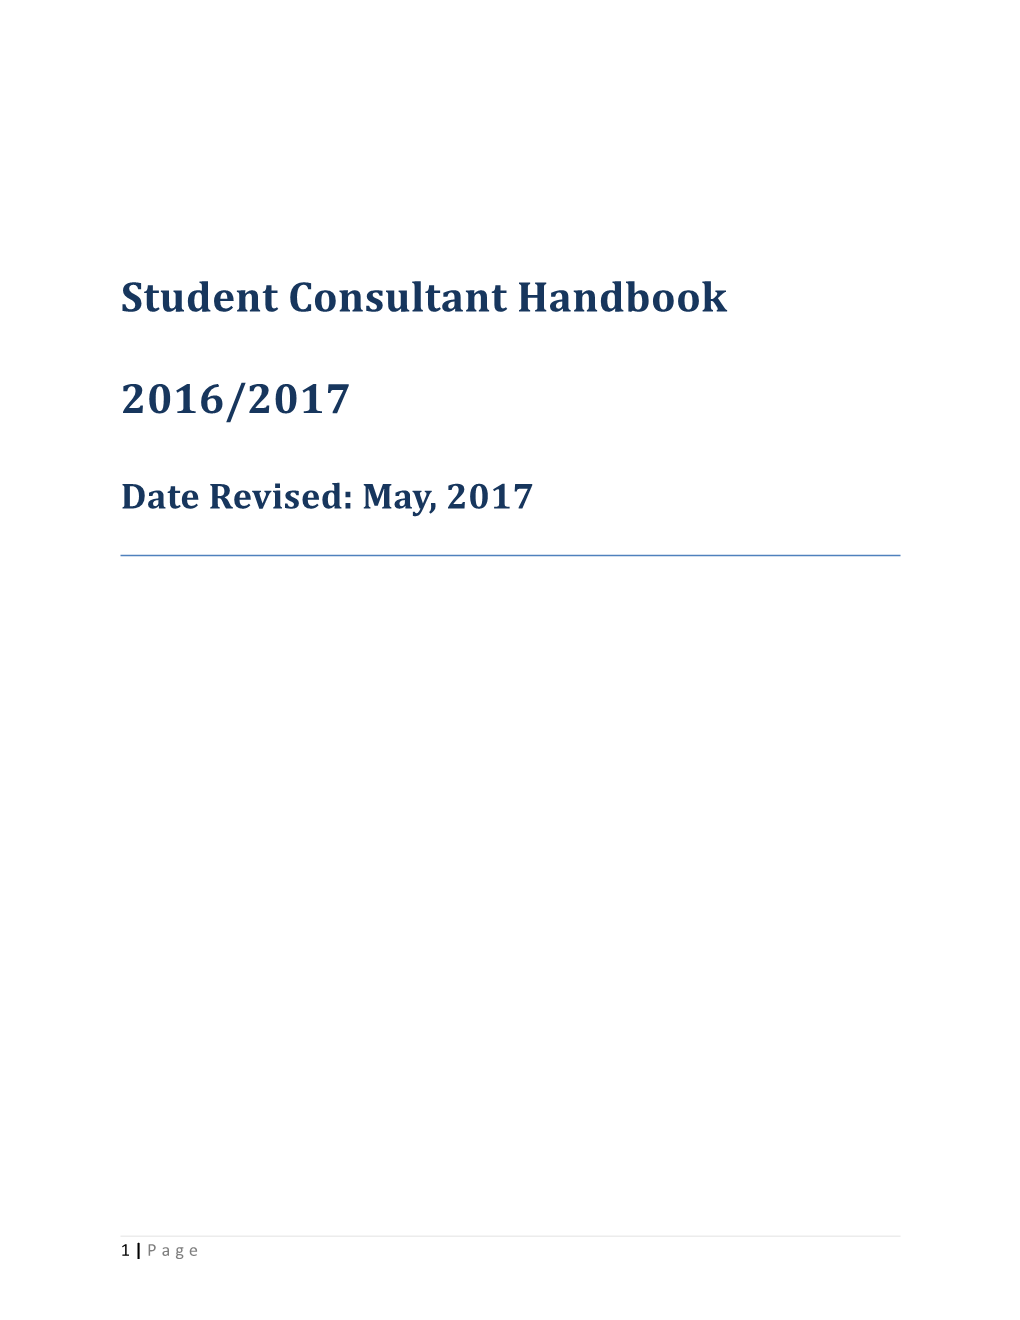 Responsibilities and Duties of a Student Consultant